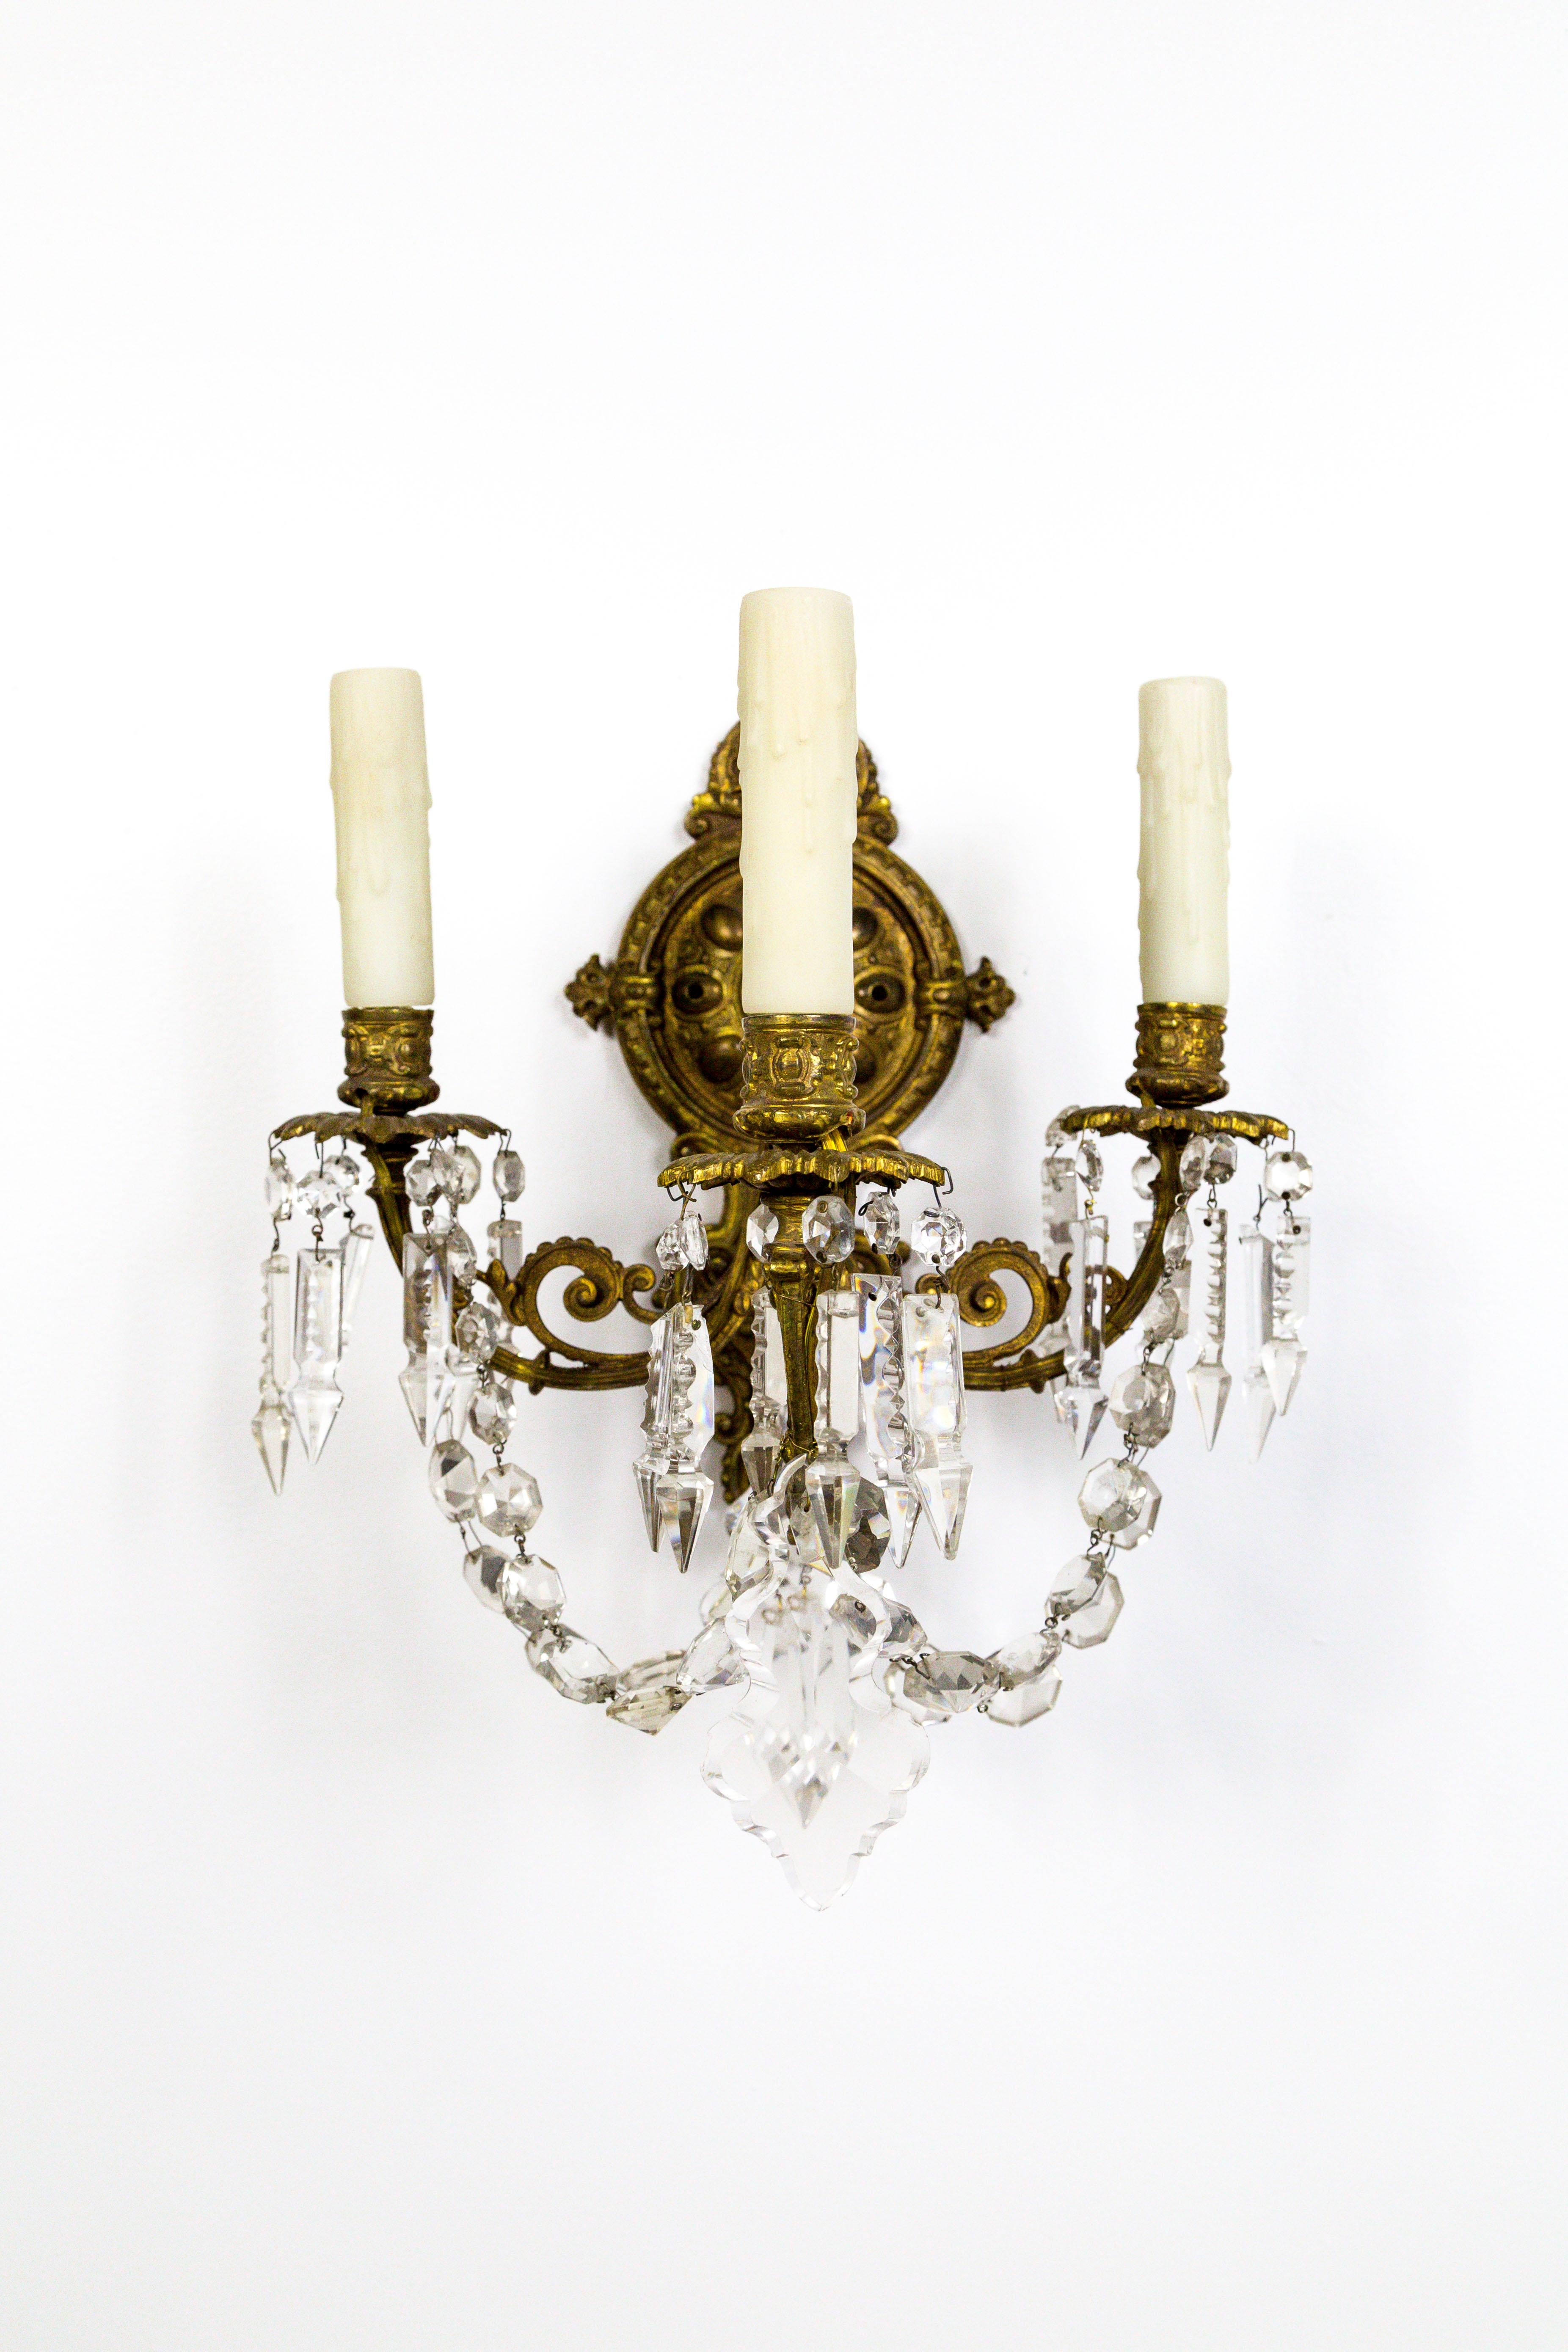 A striking pair of elaborate, French sconces in the Belle Epoque style. The detailed, solid brass structure is extra deep, with low swooping, rope crystals that echo the scroll shapes that come together at a midpoint with a crystal spear. Dressed